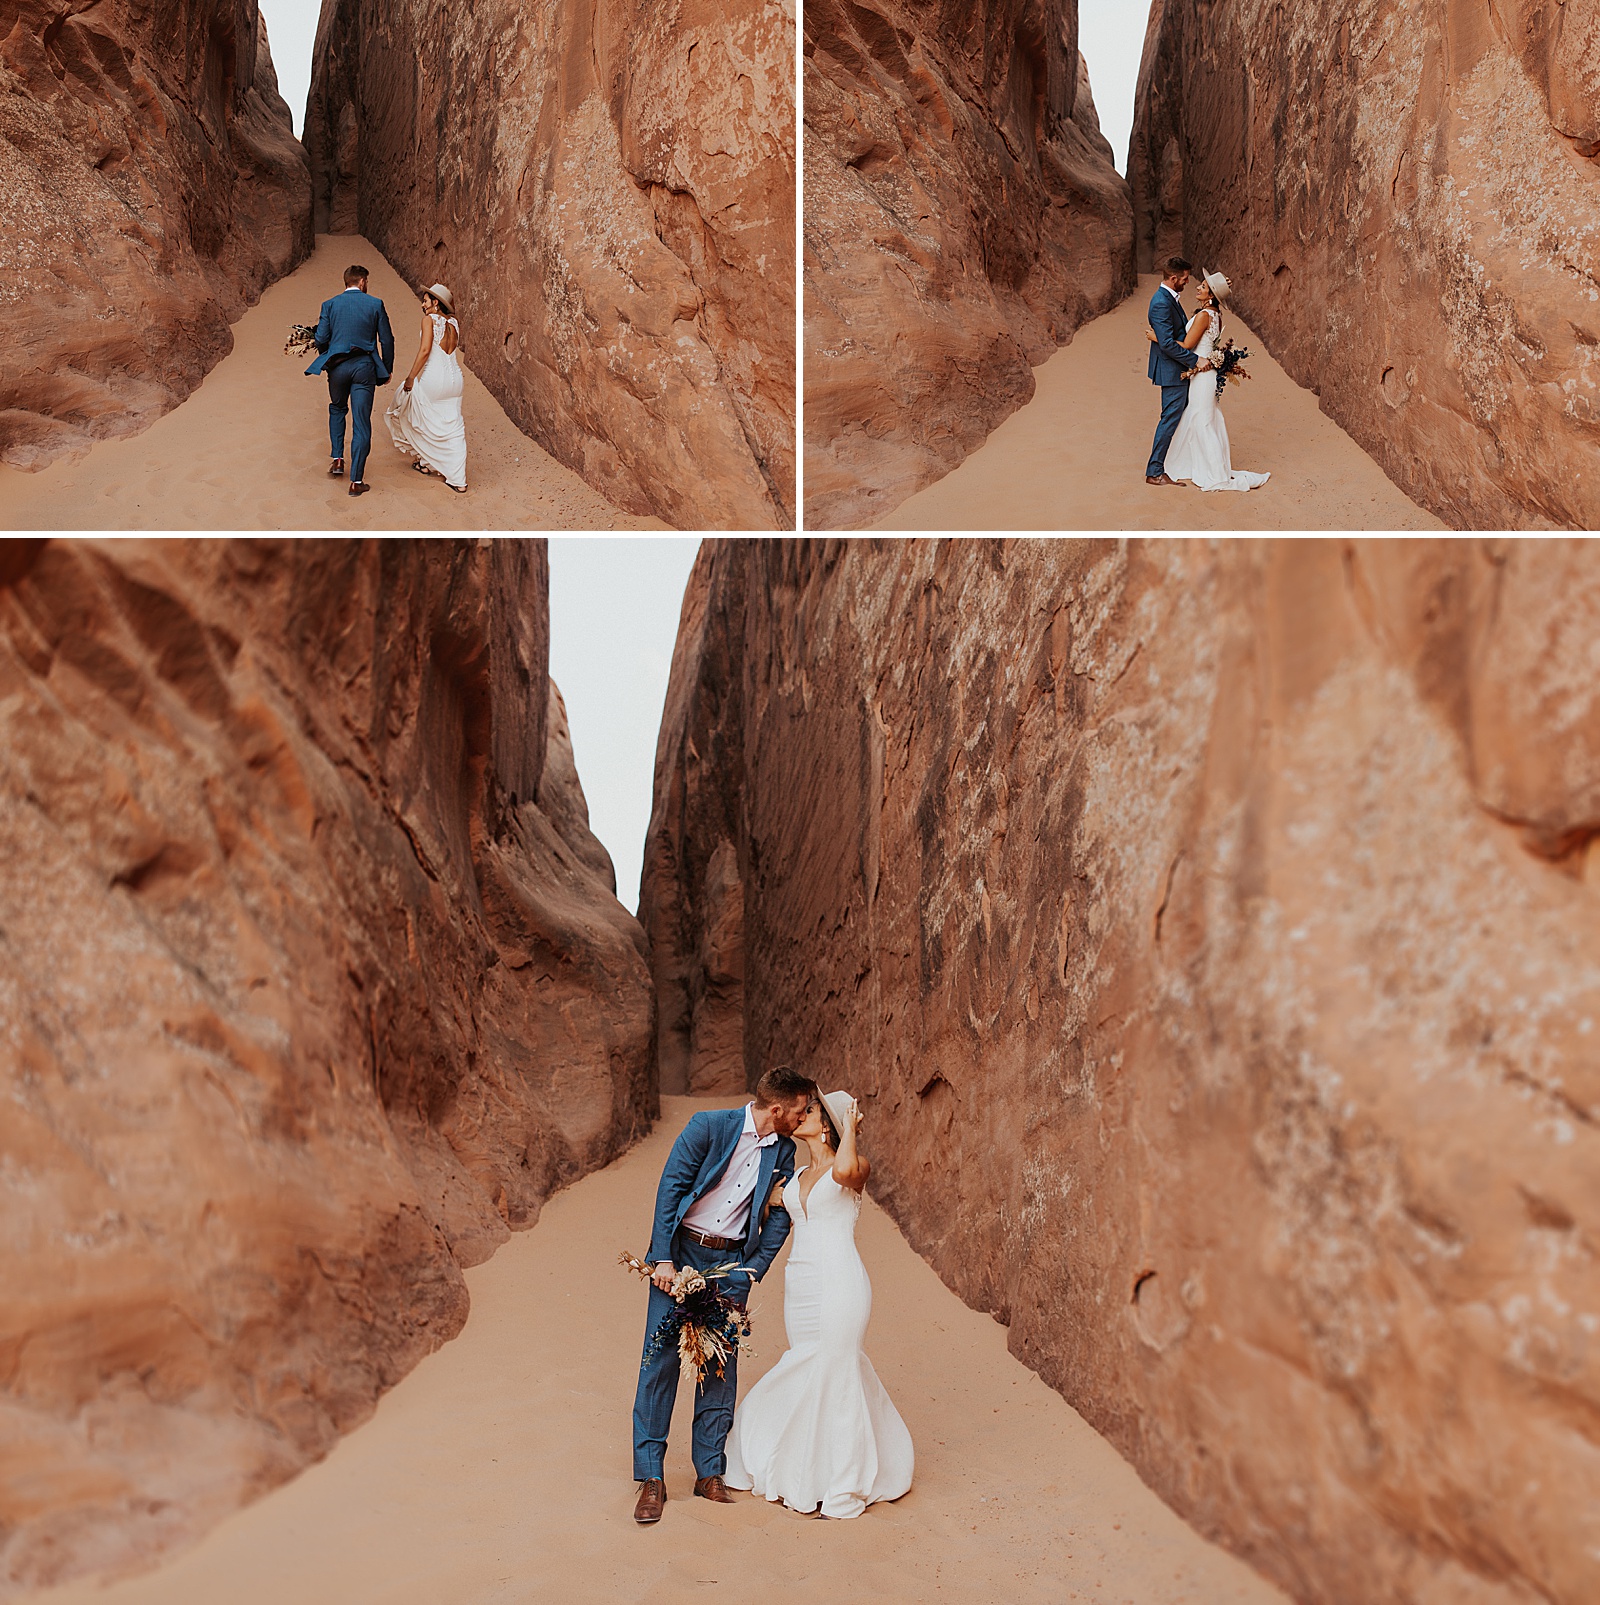 Gorgeous bride and groom at their boho Arches National Park wedding. 